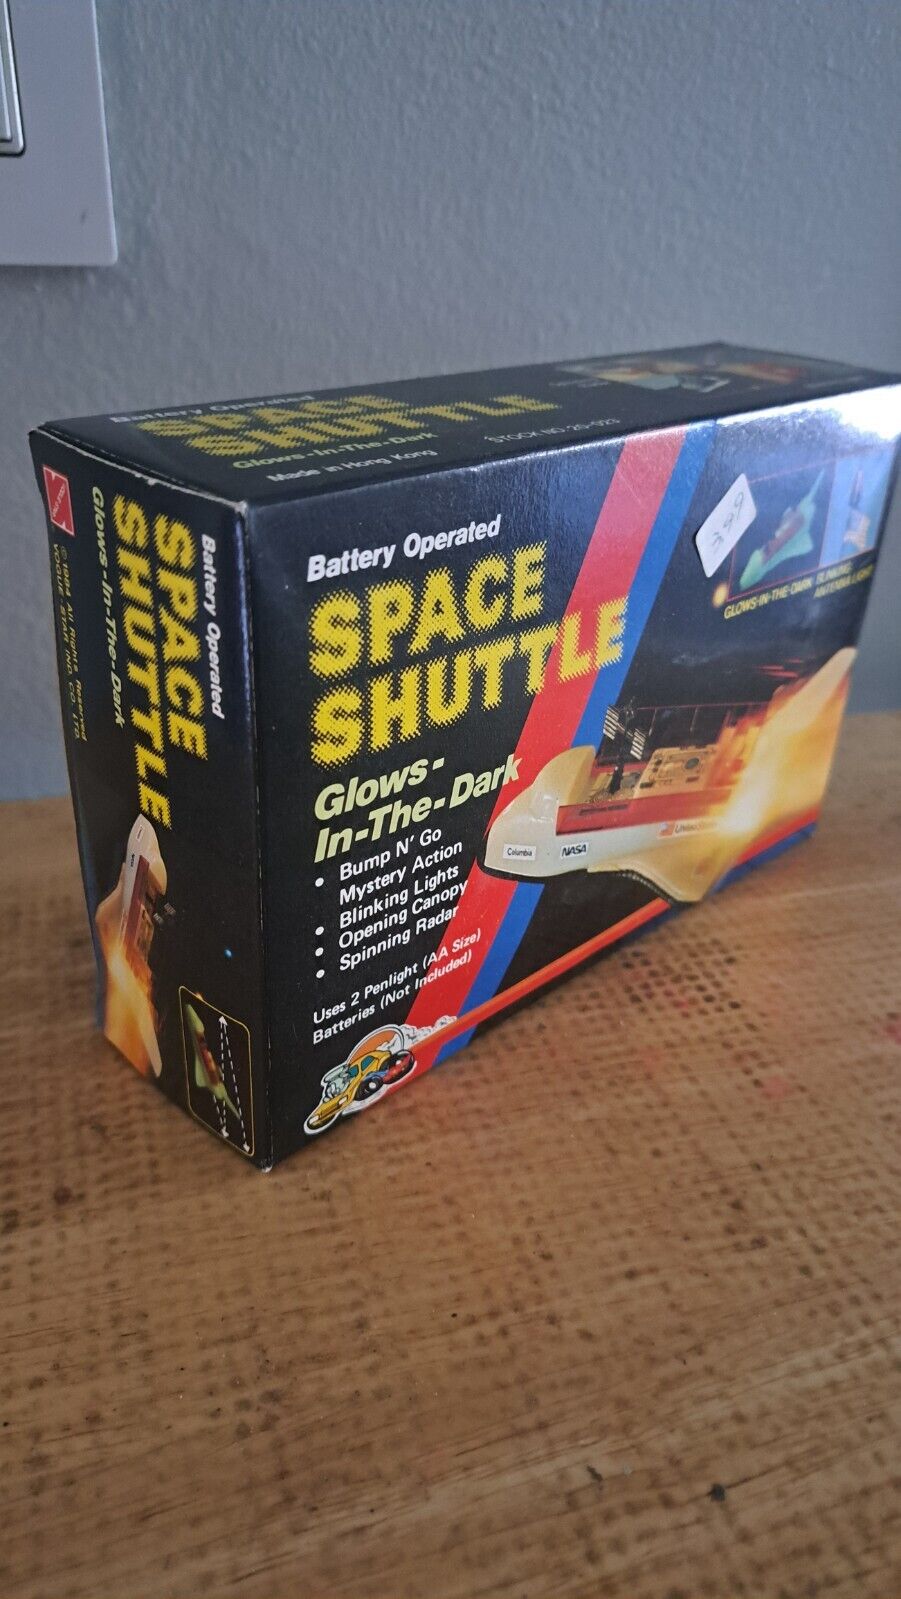 Rare, Vintage Columbia Space Shuttle Toy in Box: 1984, Vogue-Star Ind. Co., 